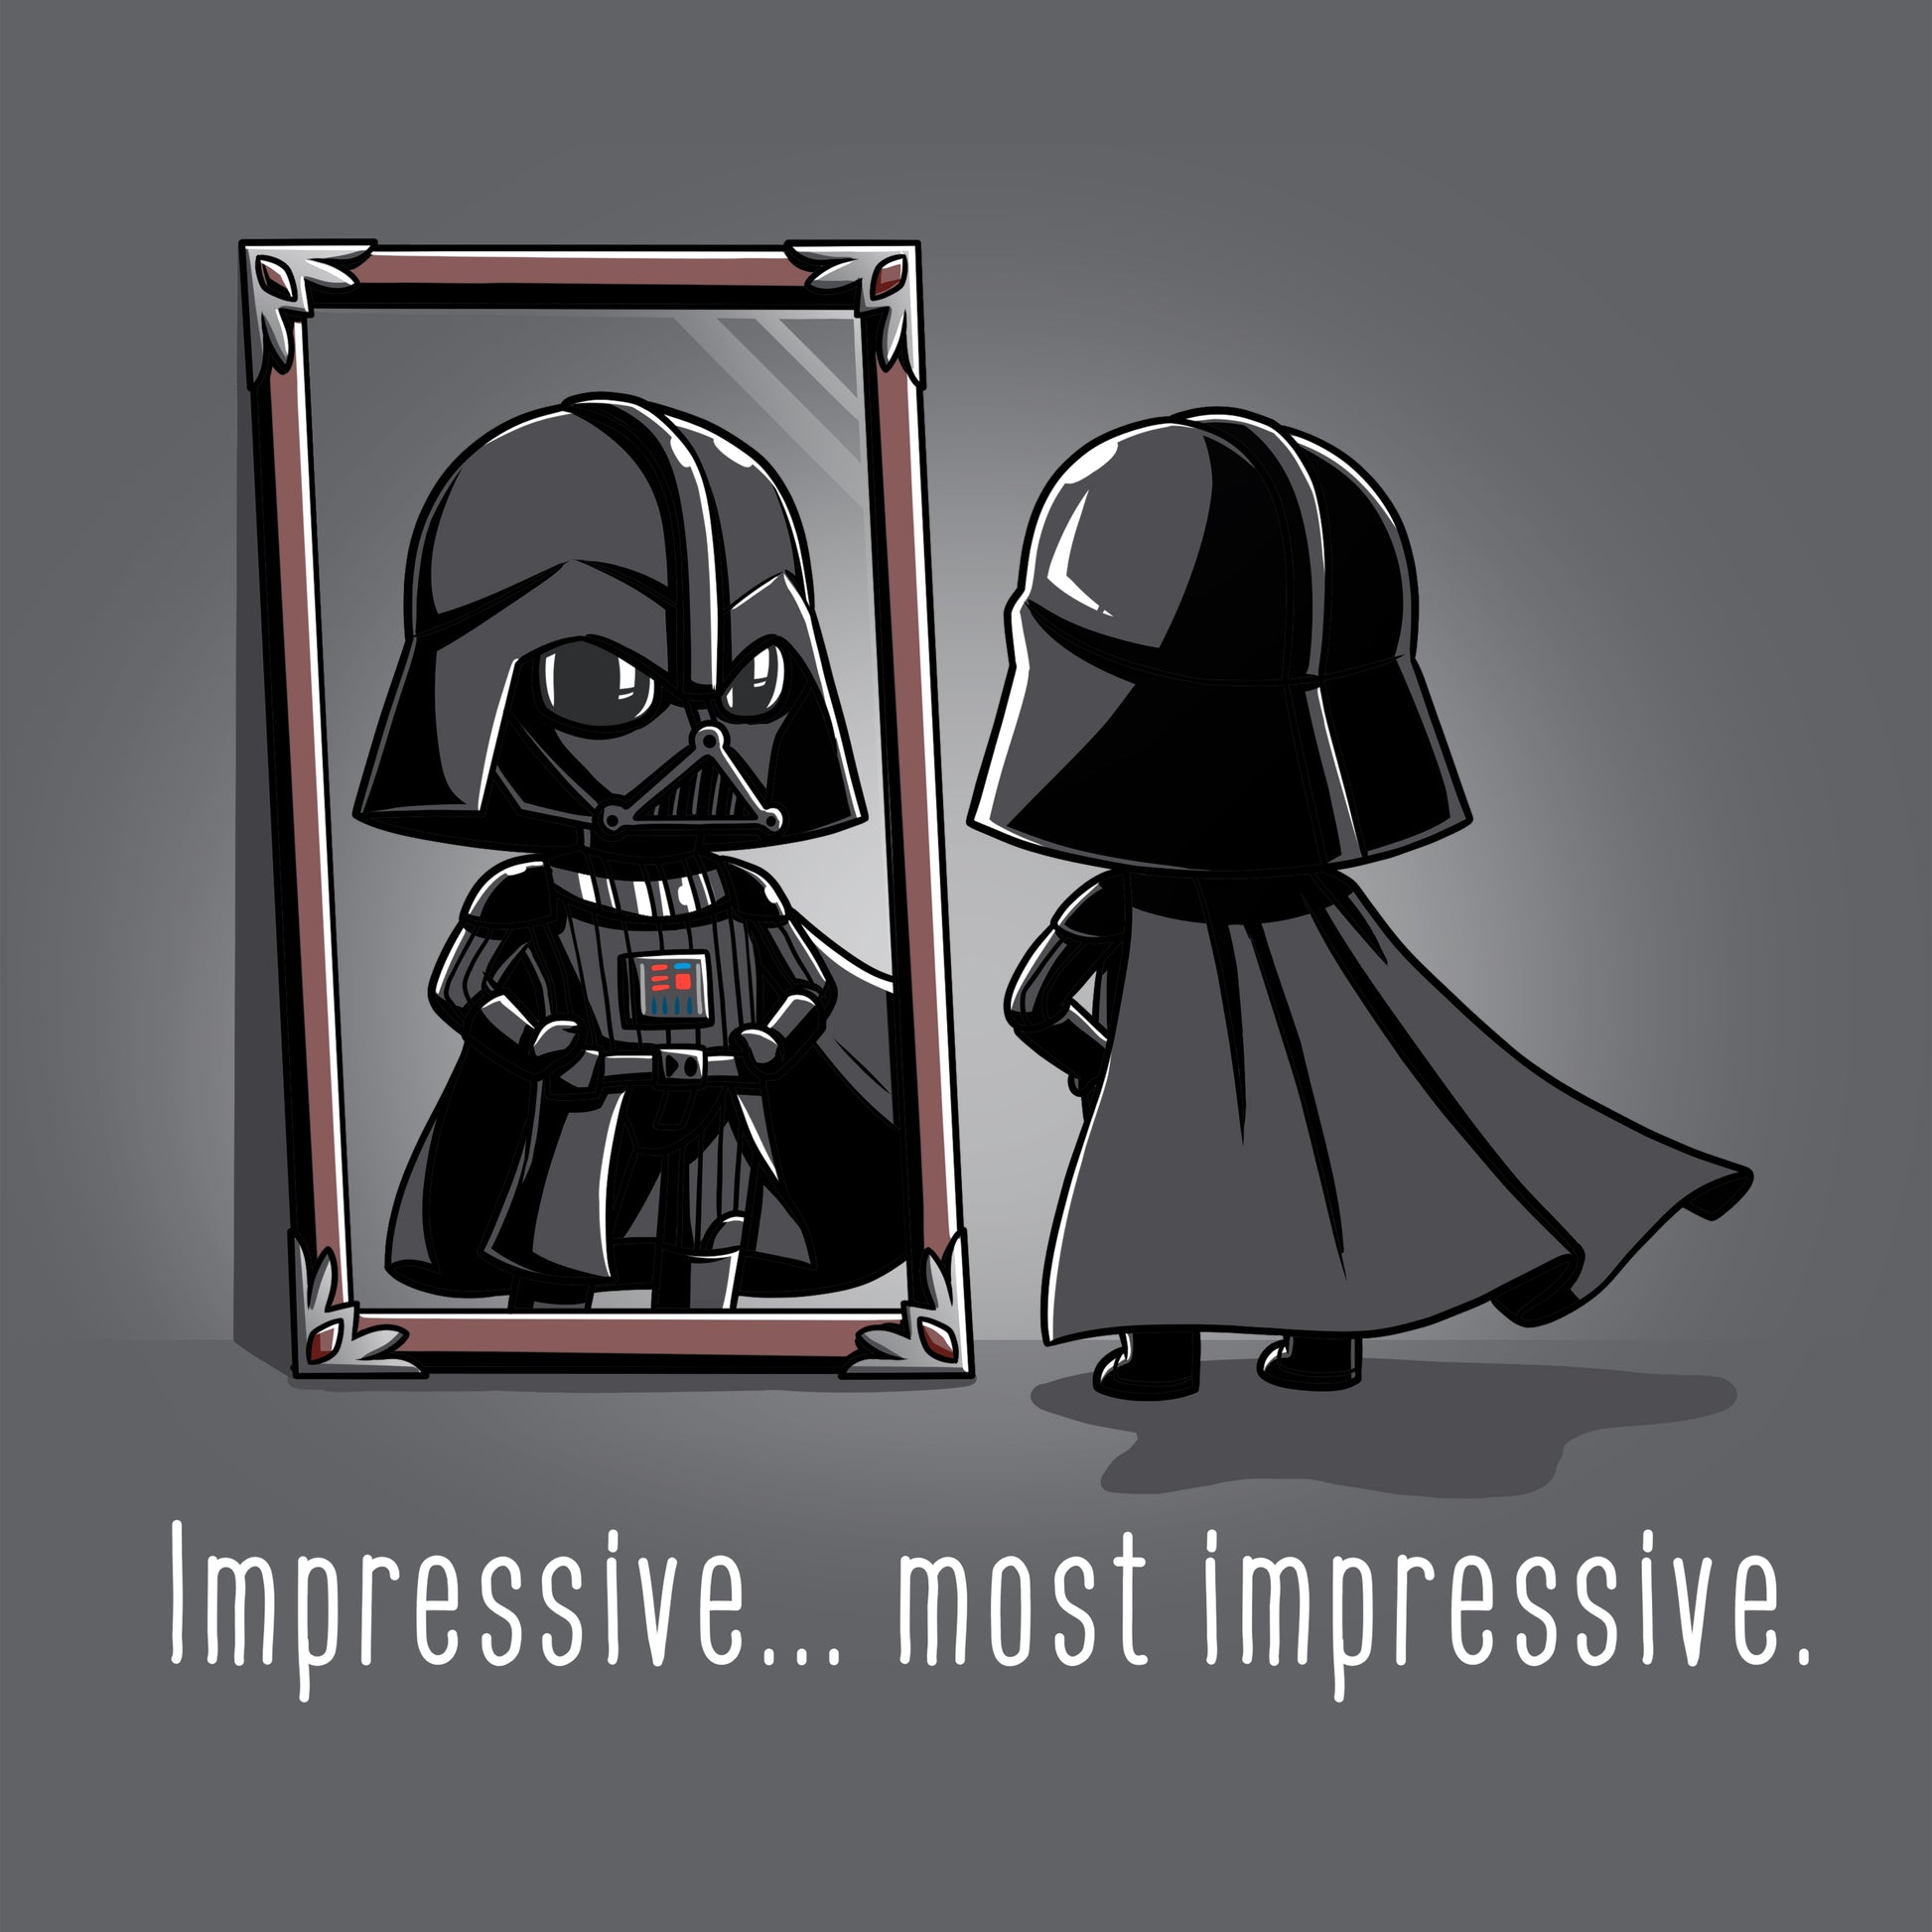 A Star Wars Unisex Tee featuring Darth Vader looking at himself in a mirror named "Impressive...Most Impressive".